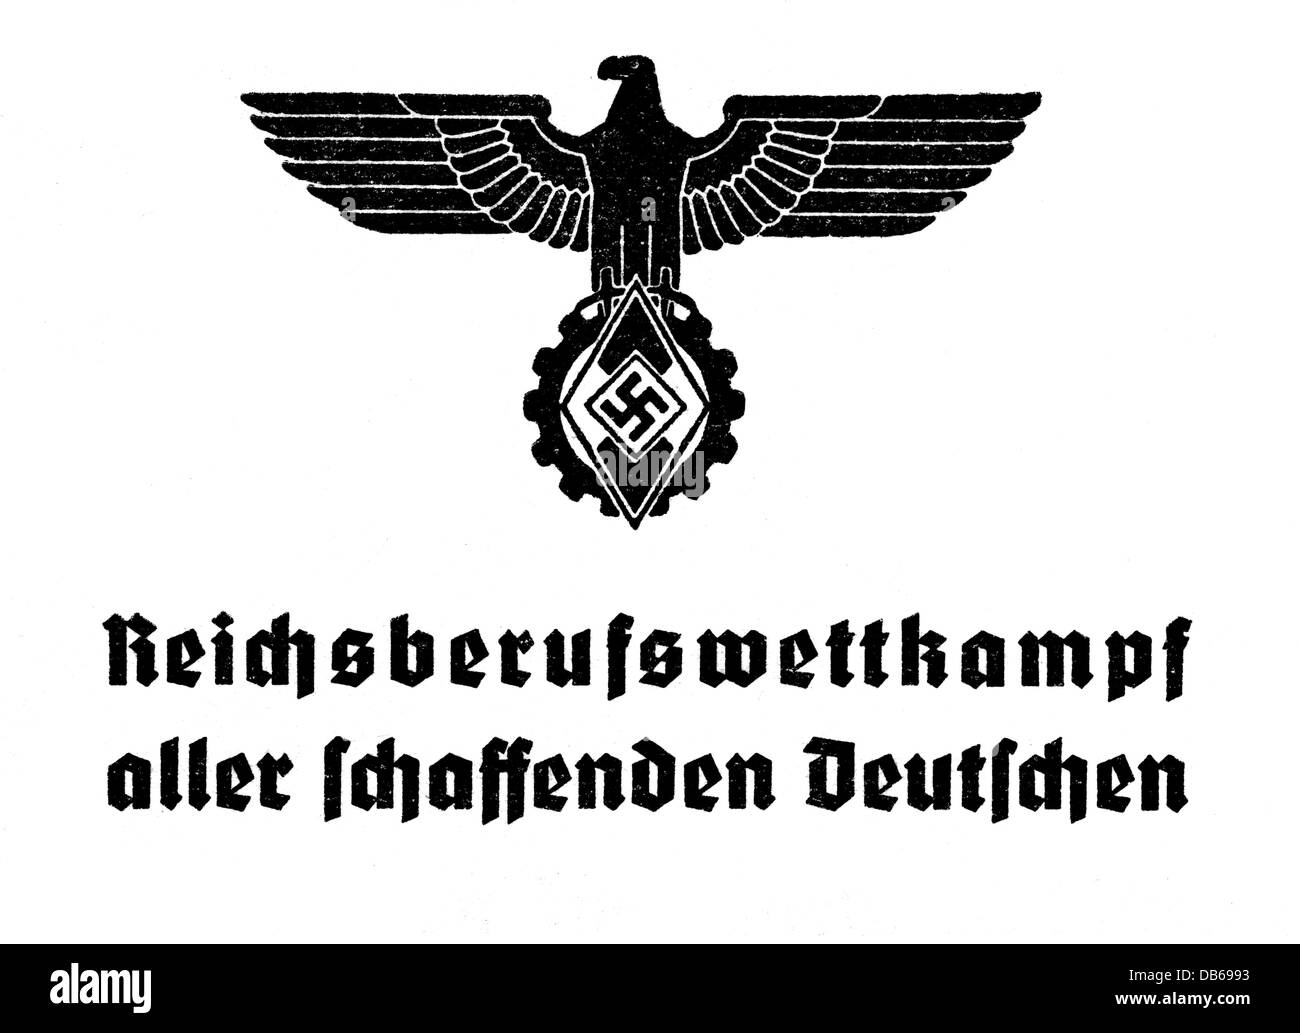 National Socialism, organisations, Hitler Youth (Hitlerjugend, HJ), National Vocational Competition (Reichsberufswettkampf), emblem, late 1930s, Additional-Rights-Clearences-Not Available Stock Photo